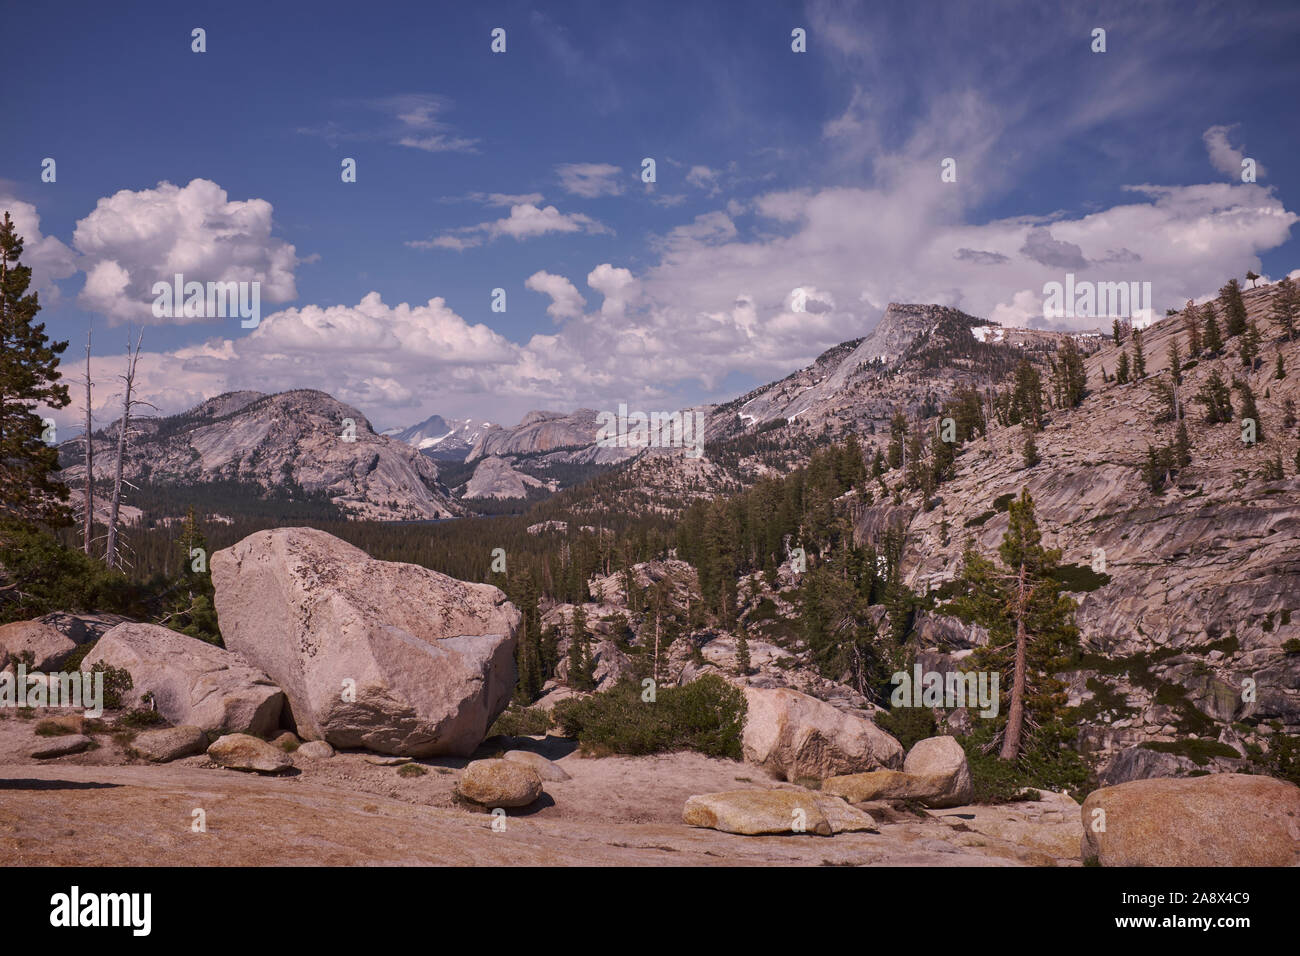 Half-dome from Olmstead Point in Yosemite National Park, California, USA Stock Photo